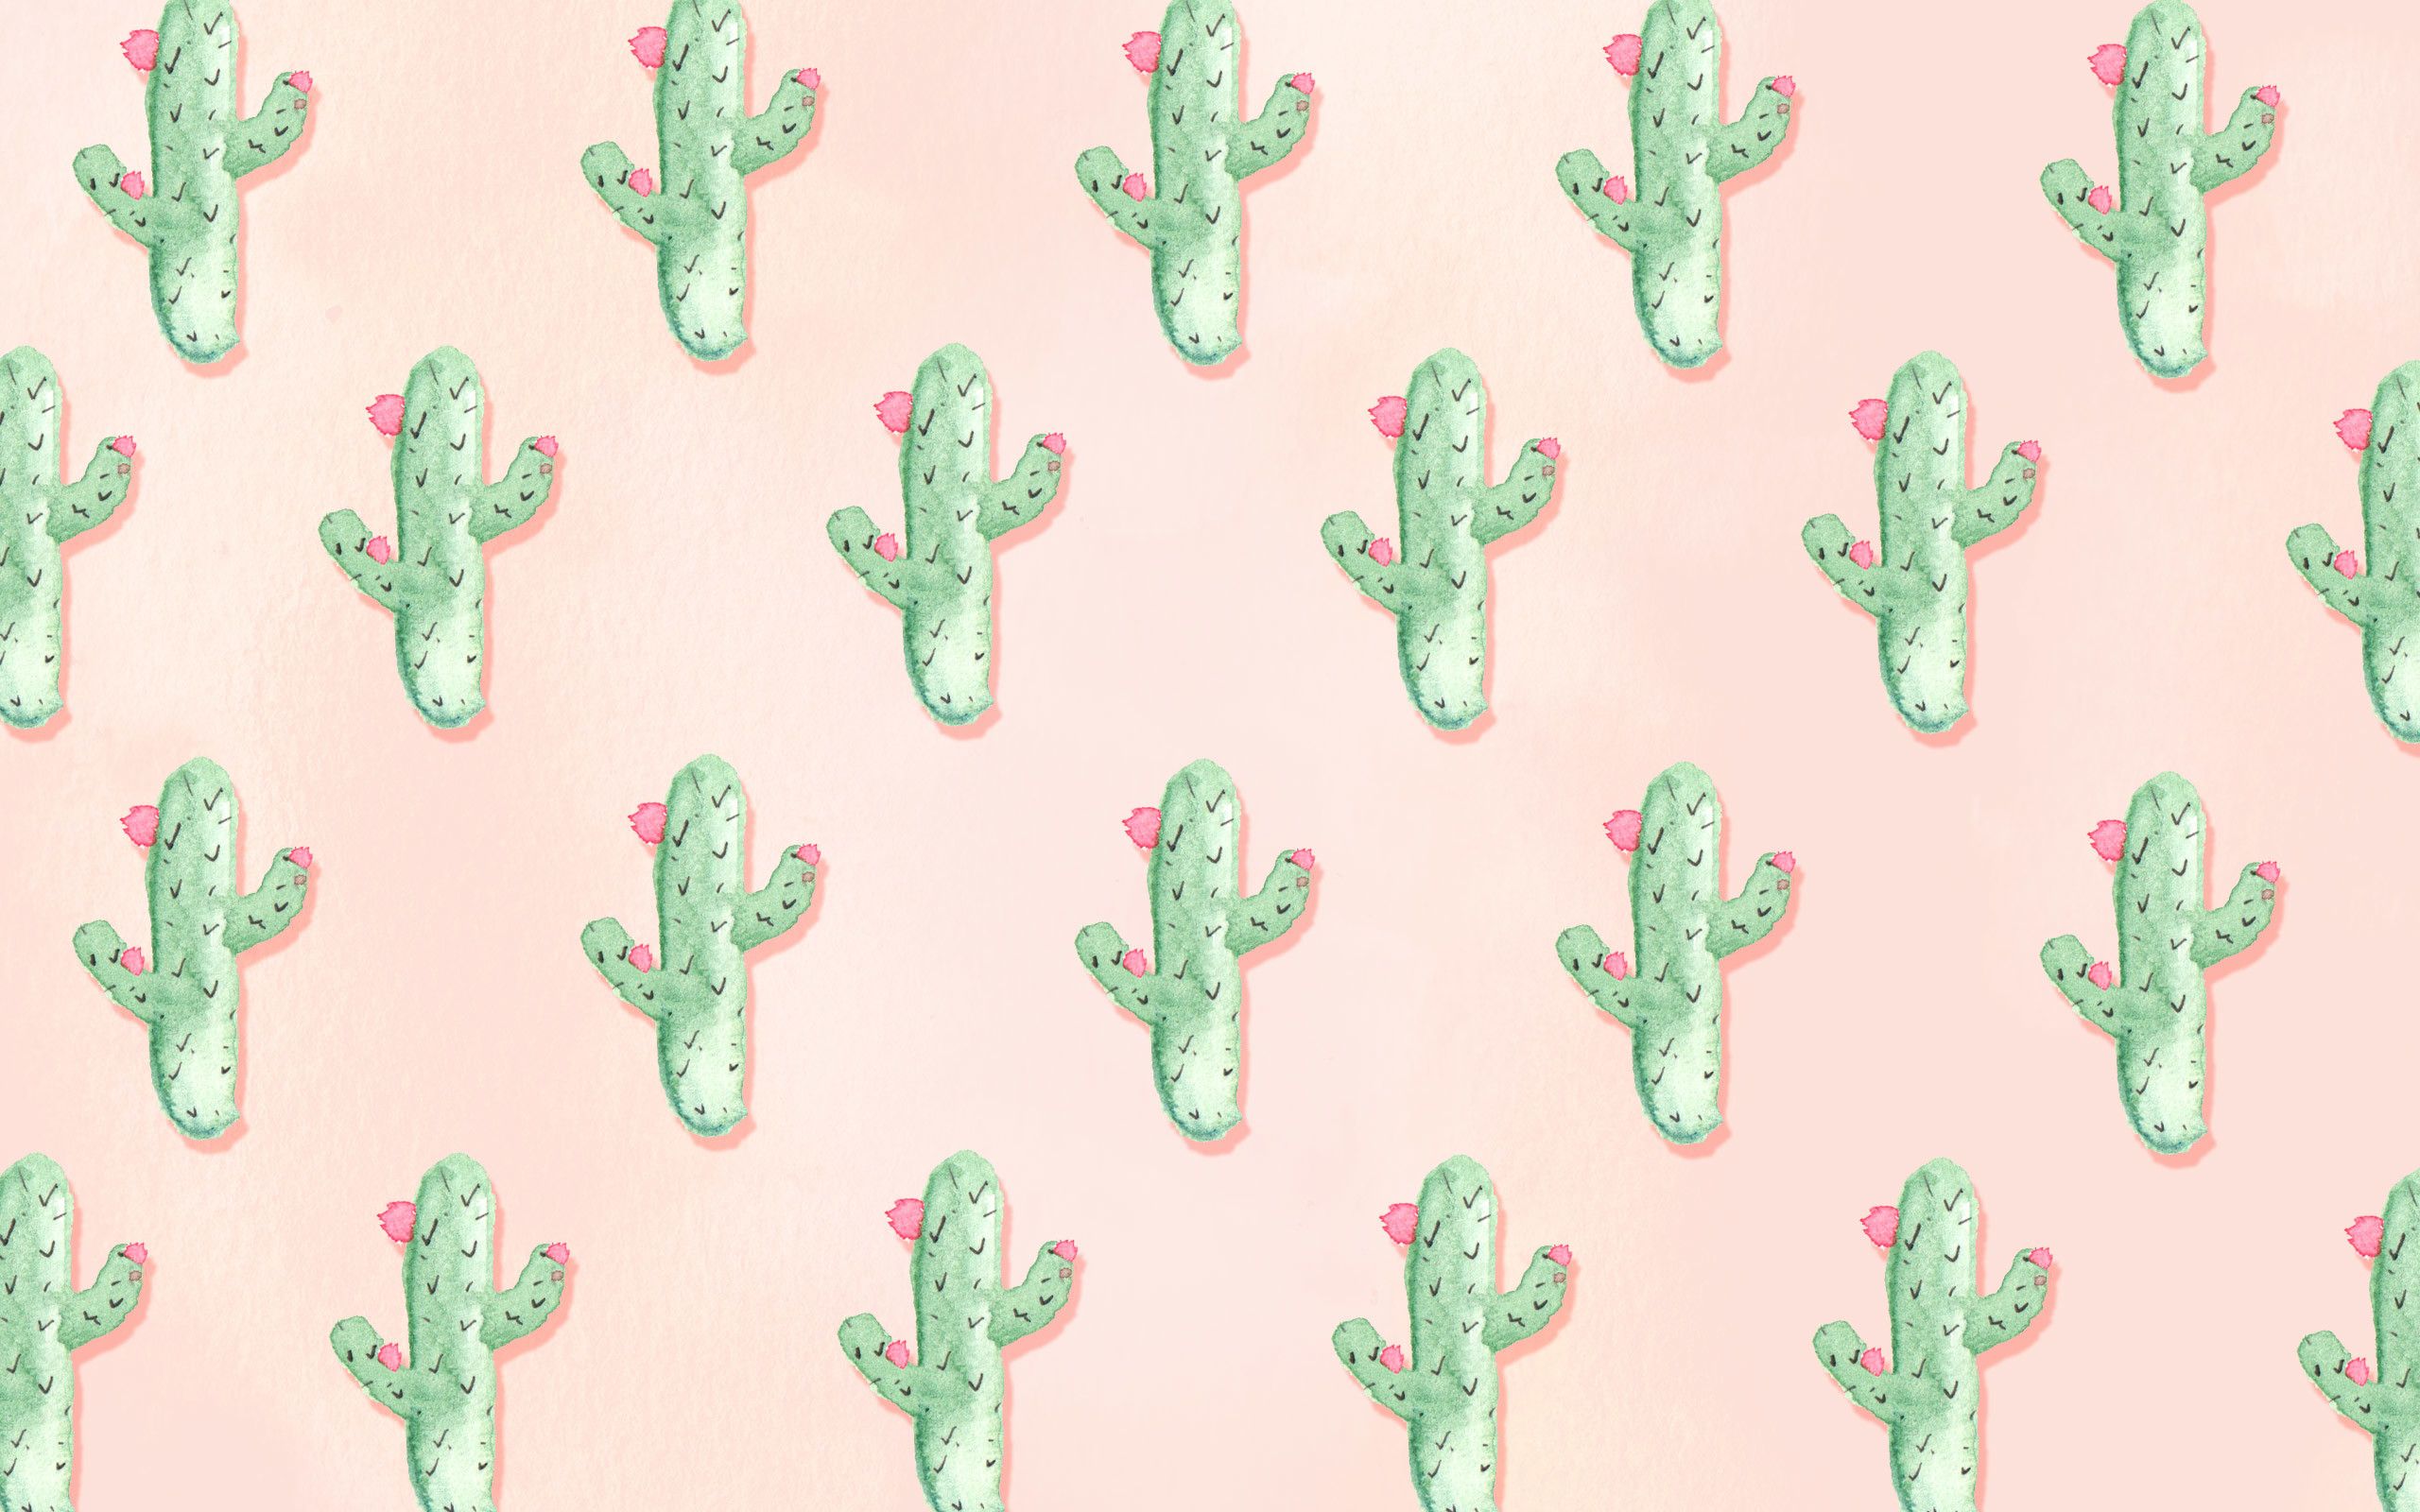 4K Kawaii Cute Cactus Wallpapers HDAmazoninAppstore for Android